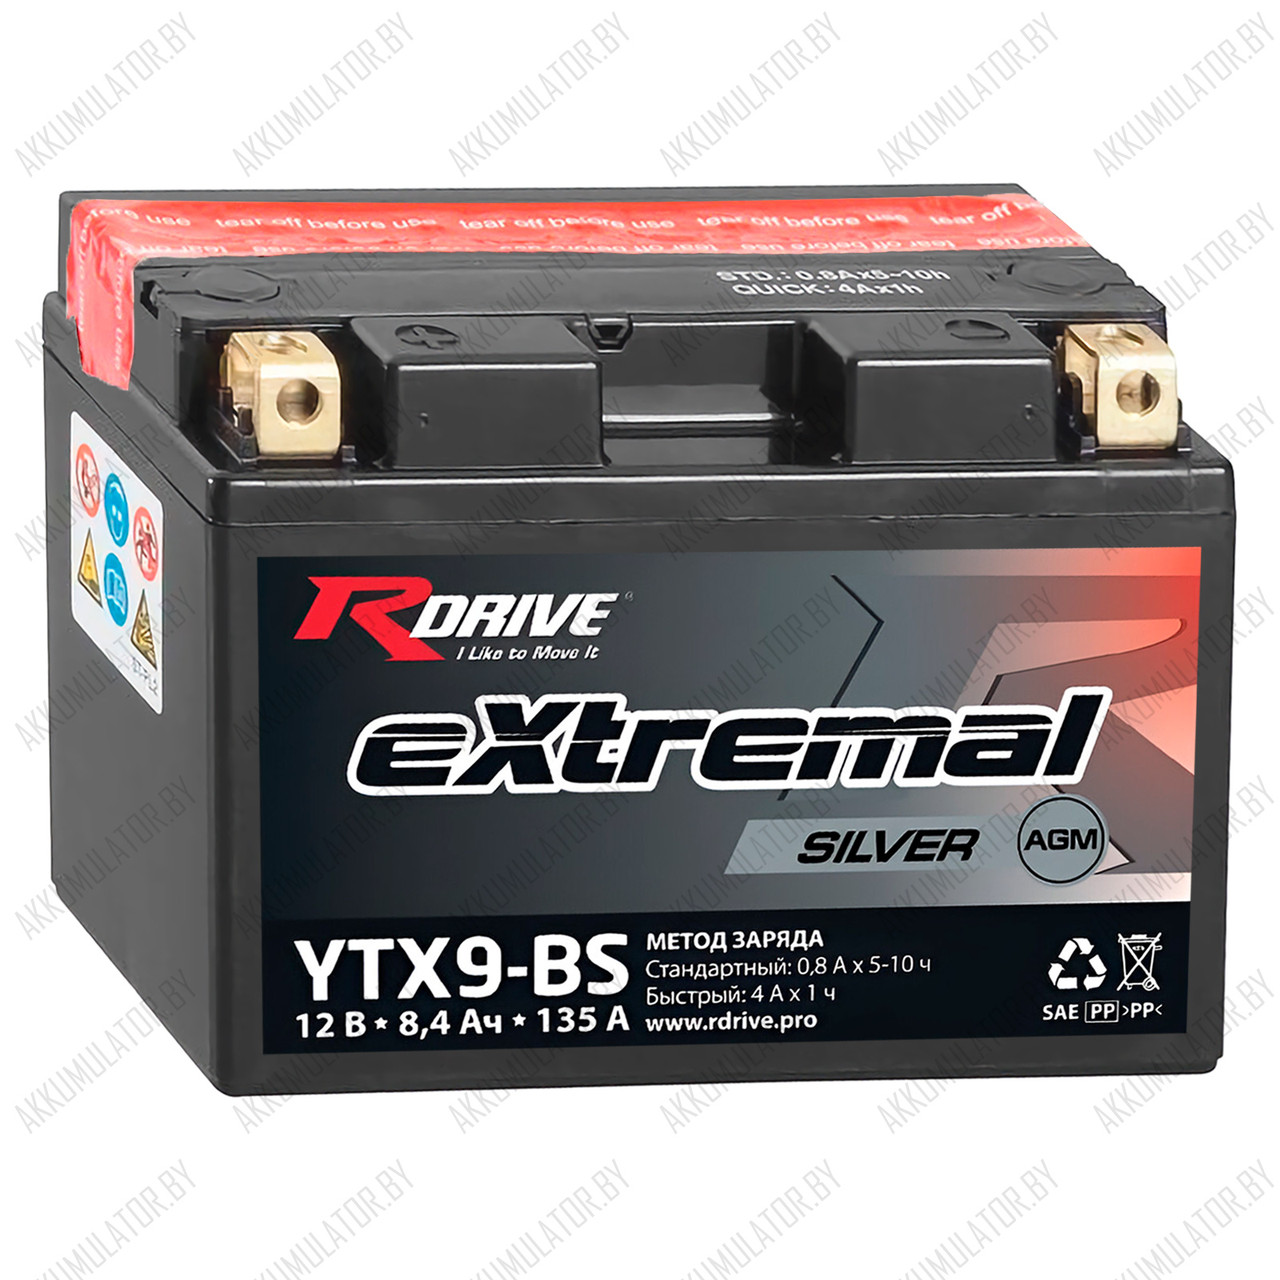 RDrive eXtremal Silver YTX9-BS / 8,4Ah - фото 1 - id-p223818766